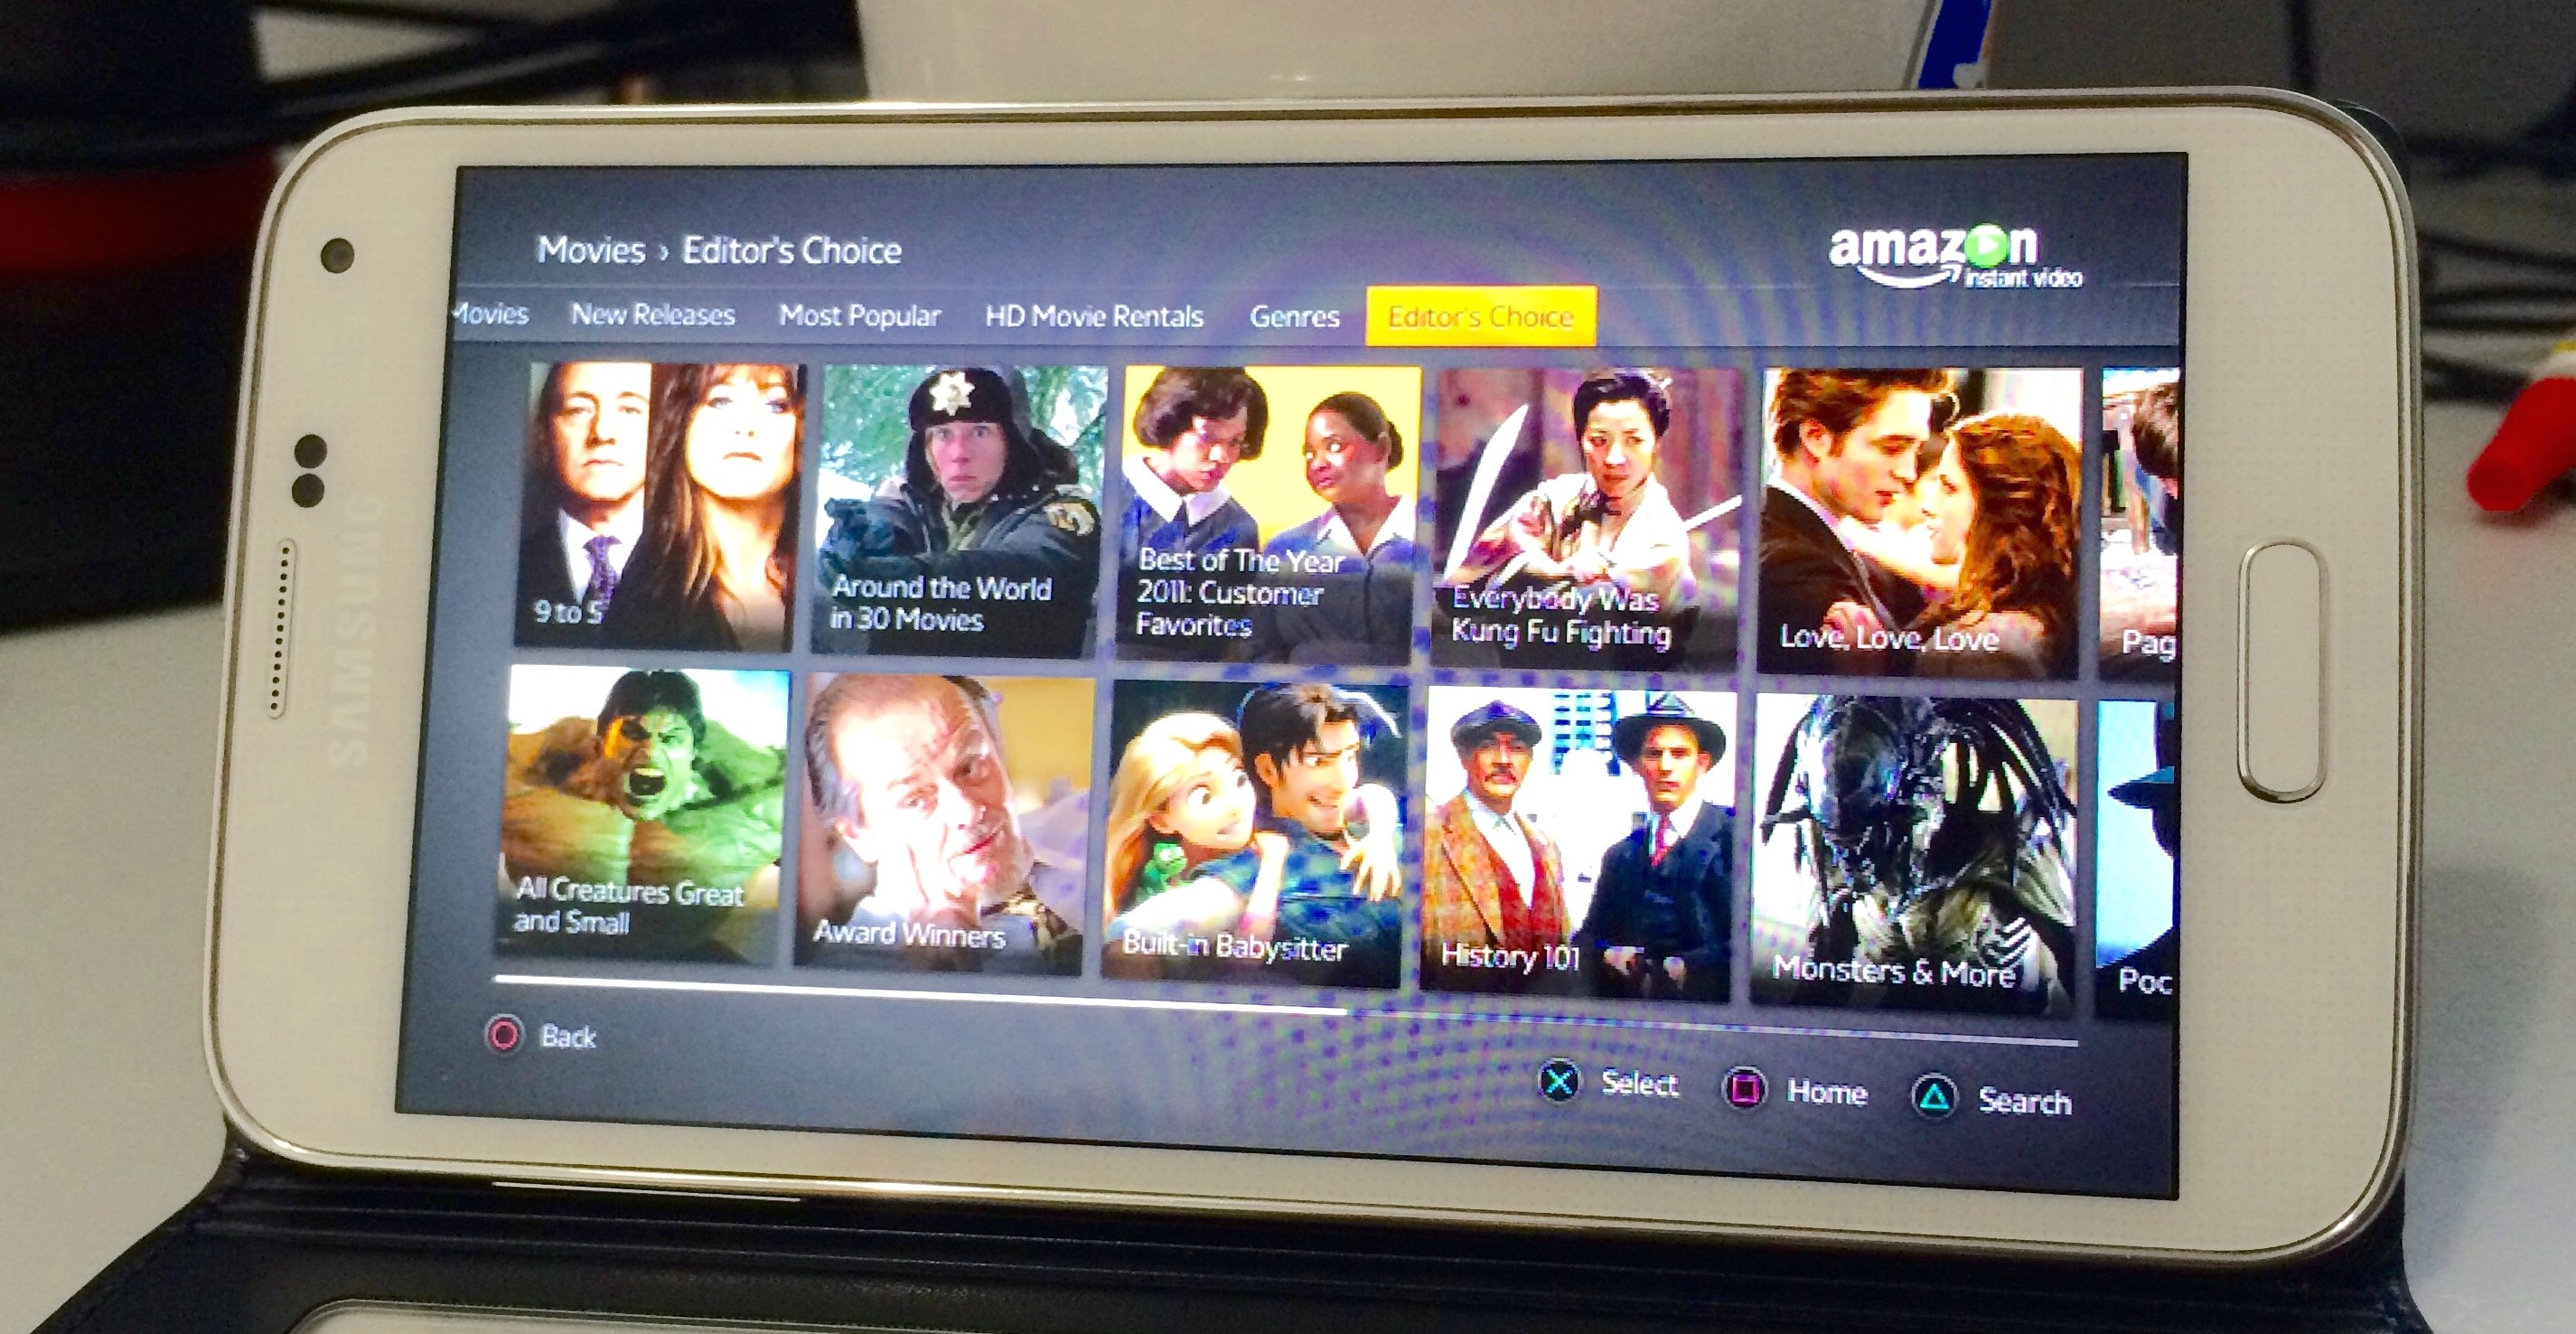 The Amazon Instant Android app is on the way according to an Amazon executive.